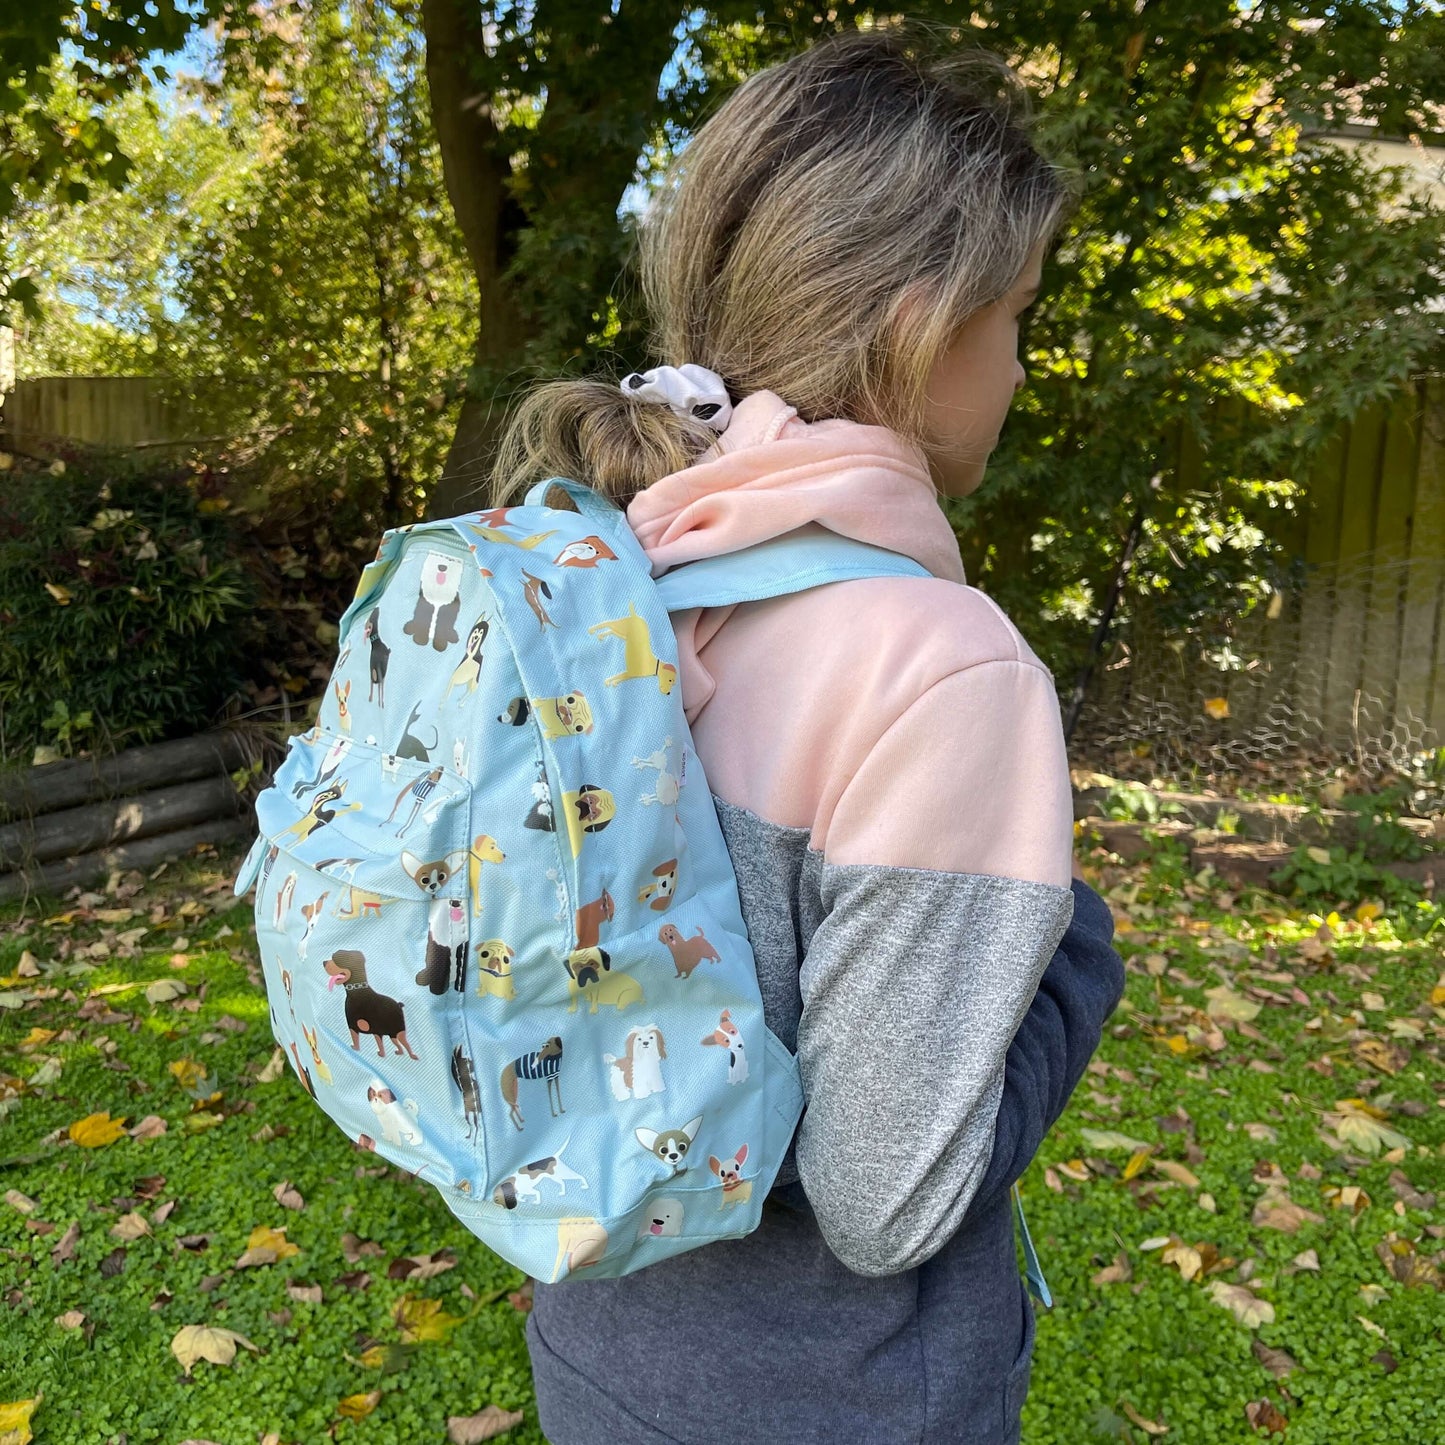 Girl wearing a pale blue backpack with various dogs printed on it.